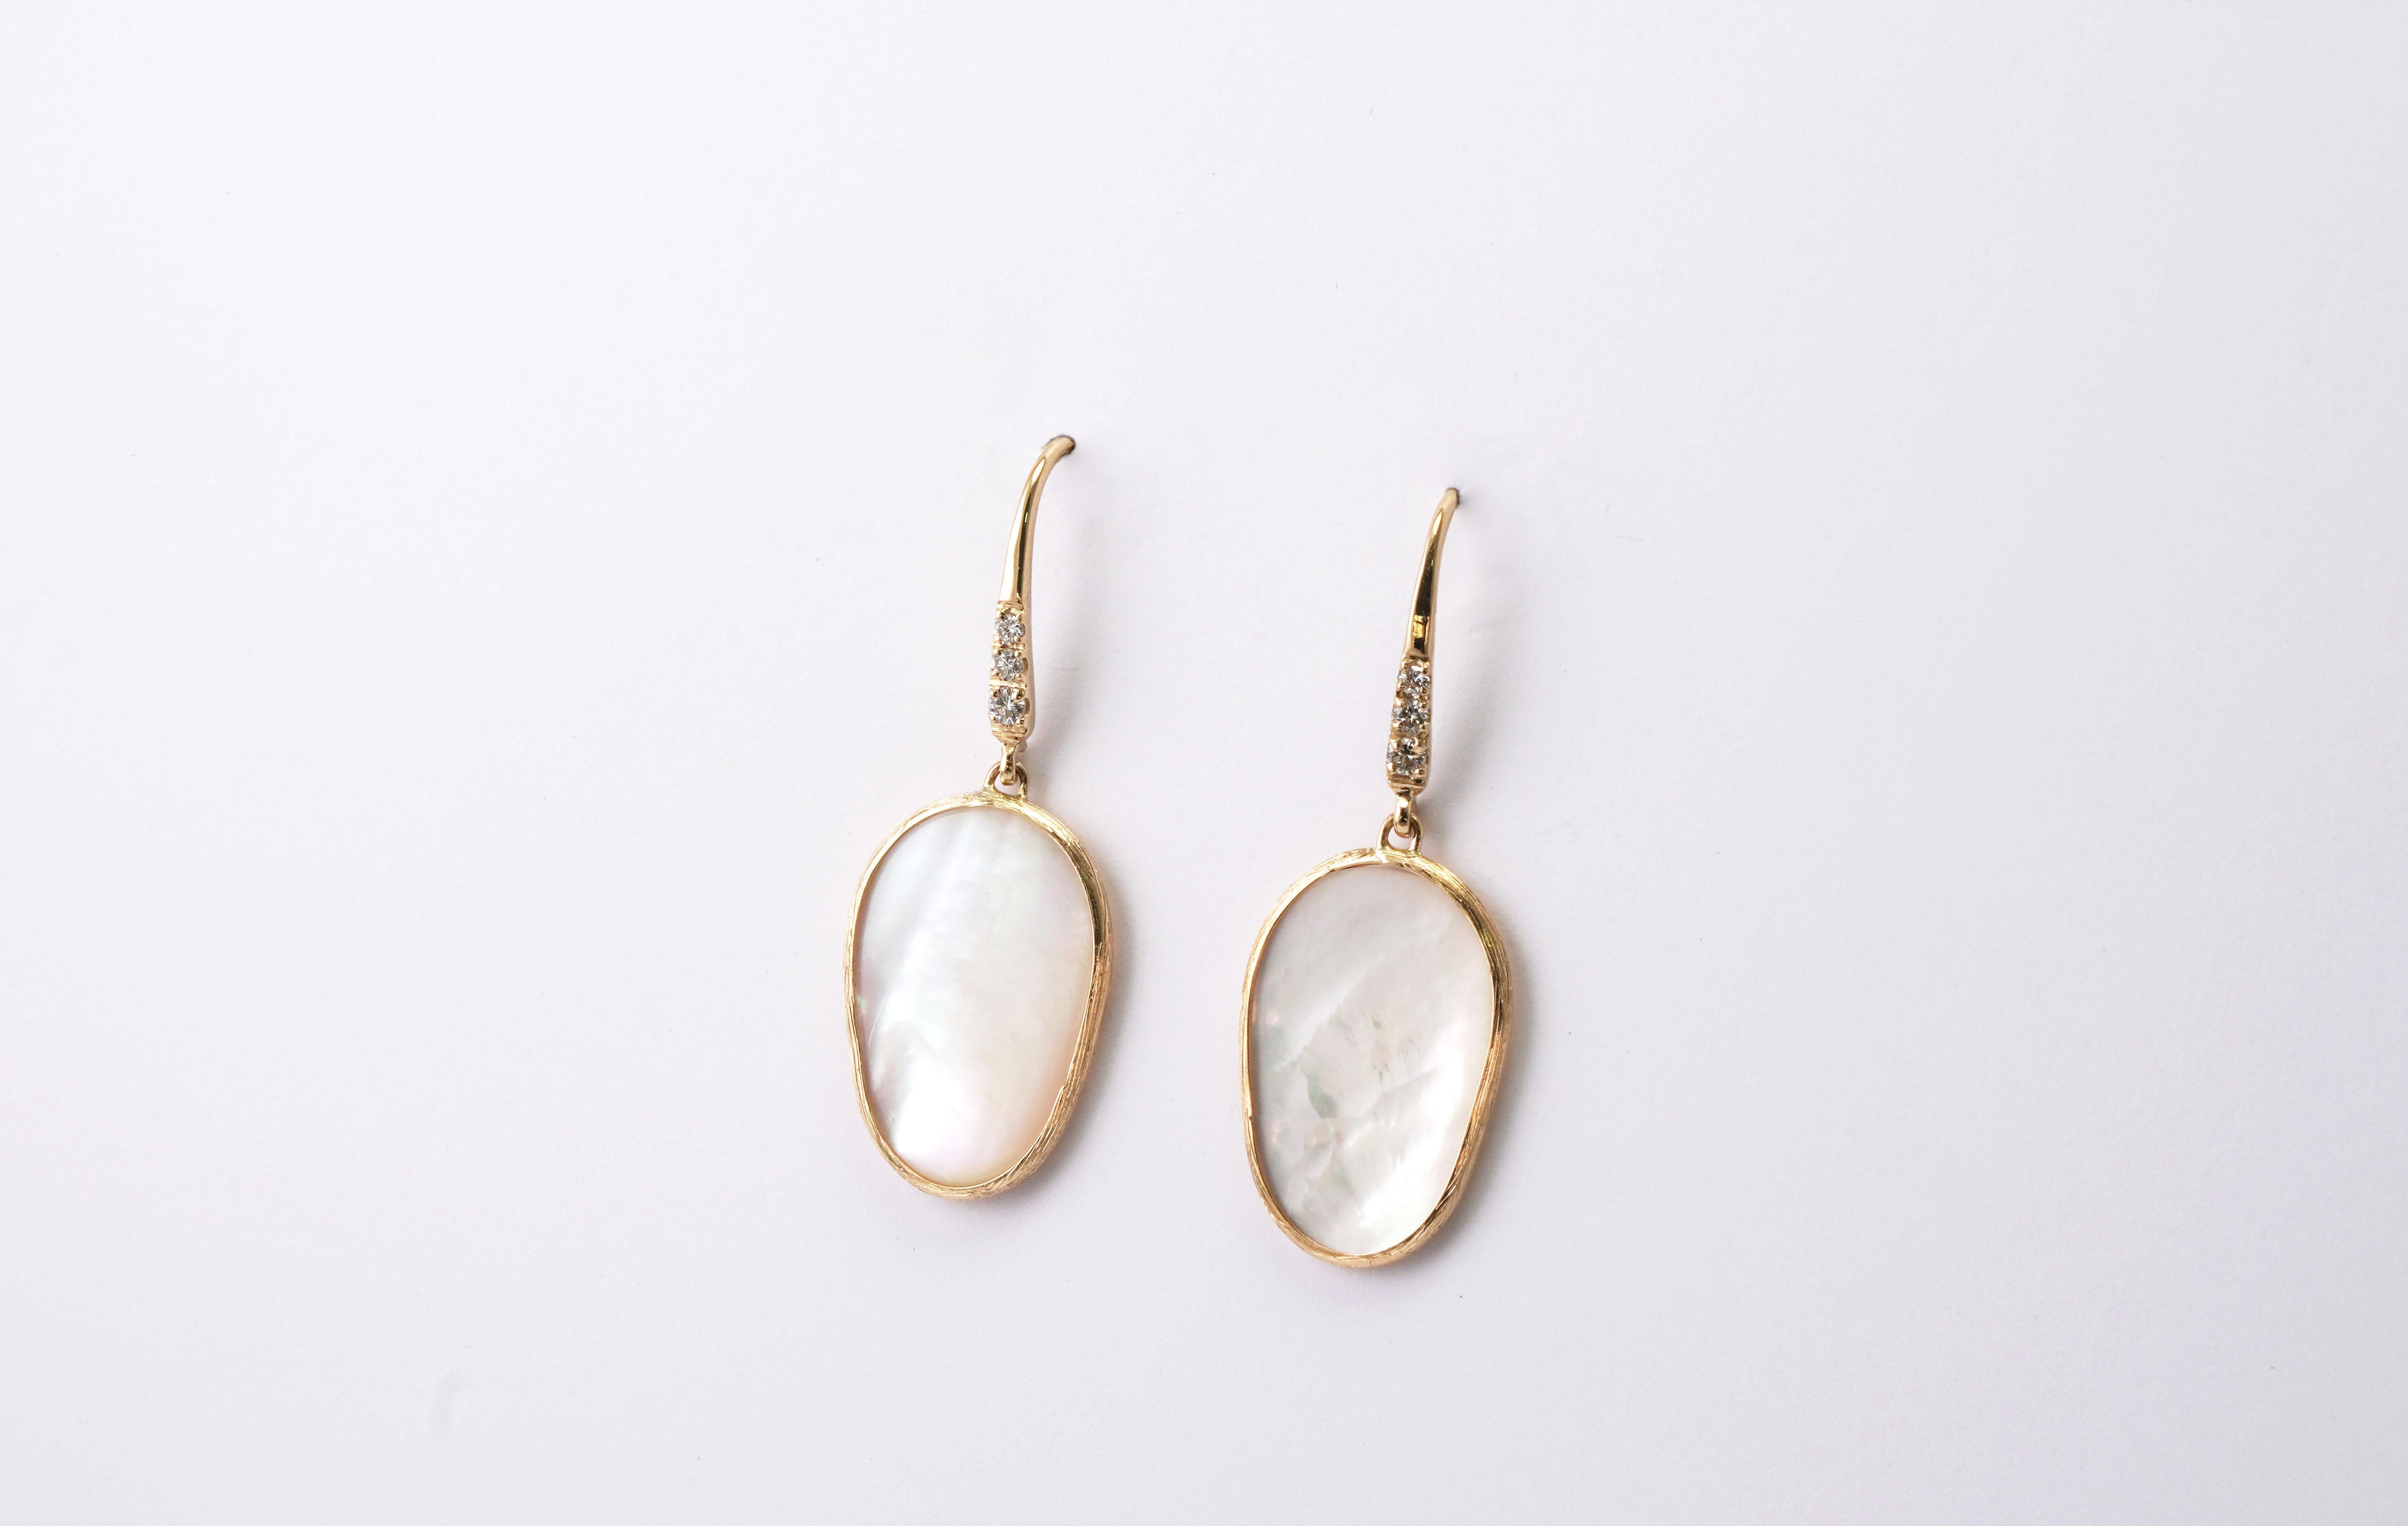 14 kt Gold pair of earrings with Mother of Pearl and Diamonds
Gold color: Yellow
Dimensions: 38 mm height
Total weight: 3.40 grams

Set with:
- Mother of Pearl ( Nacre )
Cut: Cabochon
Color: White

- Diamonds (6 pieces)
Cut: Brilliant
Weight: 0.08